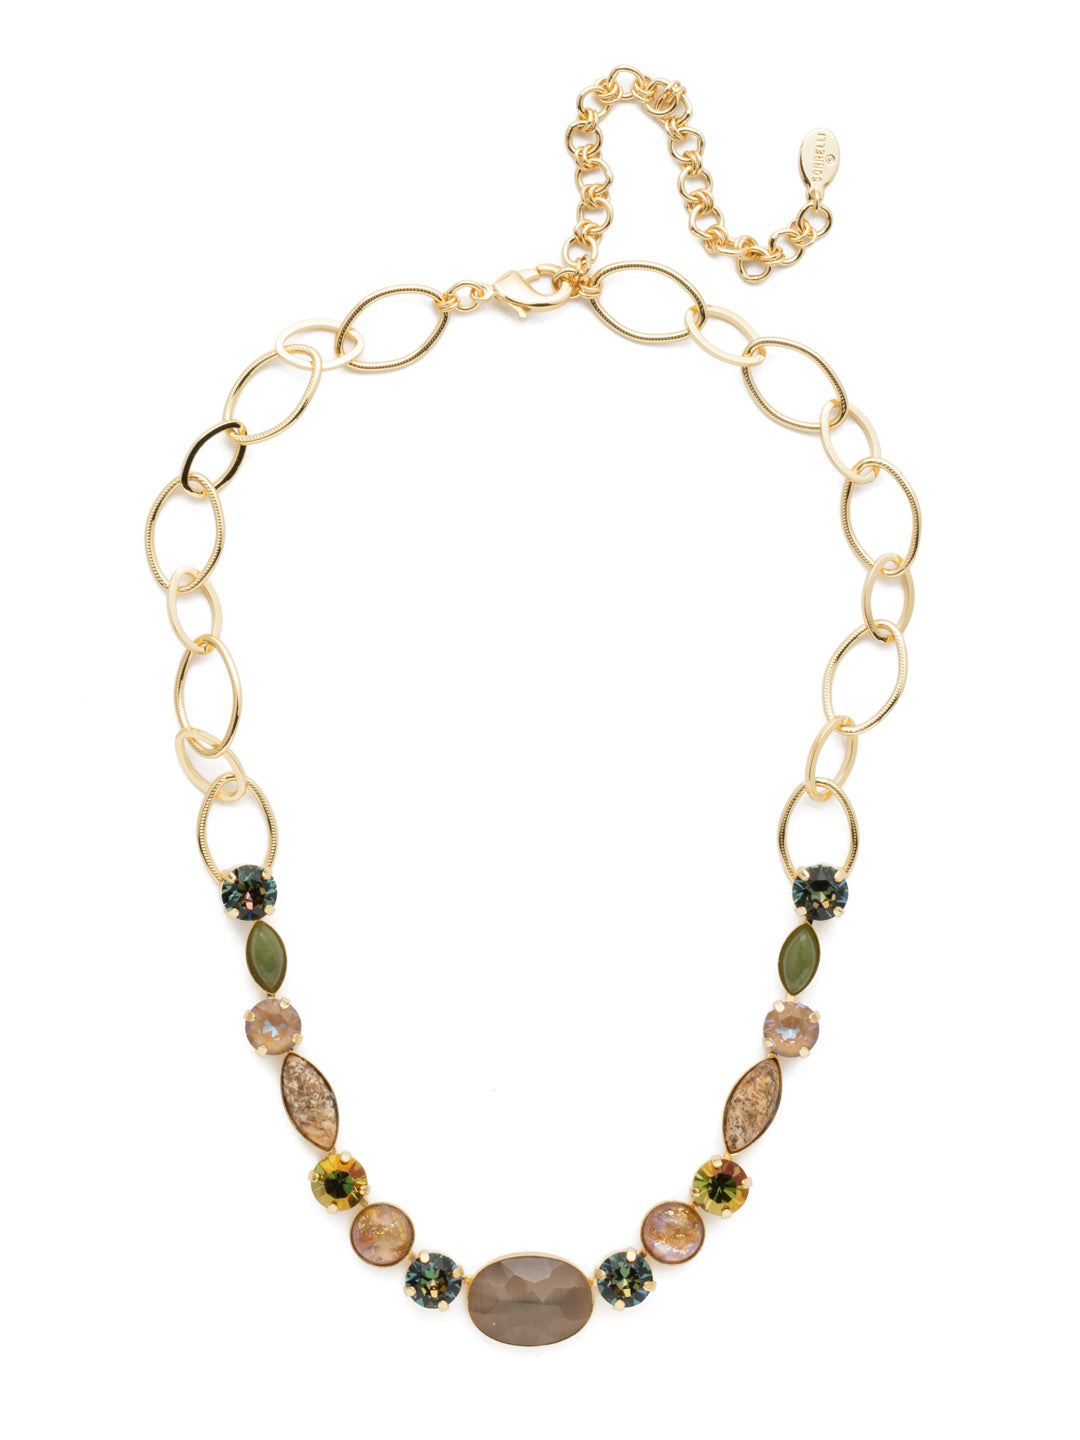 Astro Tennis Necklace - NET4BGCSM - <p>Can't decide what to wear? Put on the Astro Tennis Necklace. Between its airy metal links, earthy stones and round sparkling crystals, you're covered for any mood or occasion. From Sorrelli's Cashmere collection in our Bright Gold-tone finish.</p>